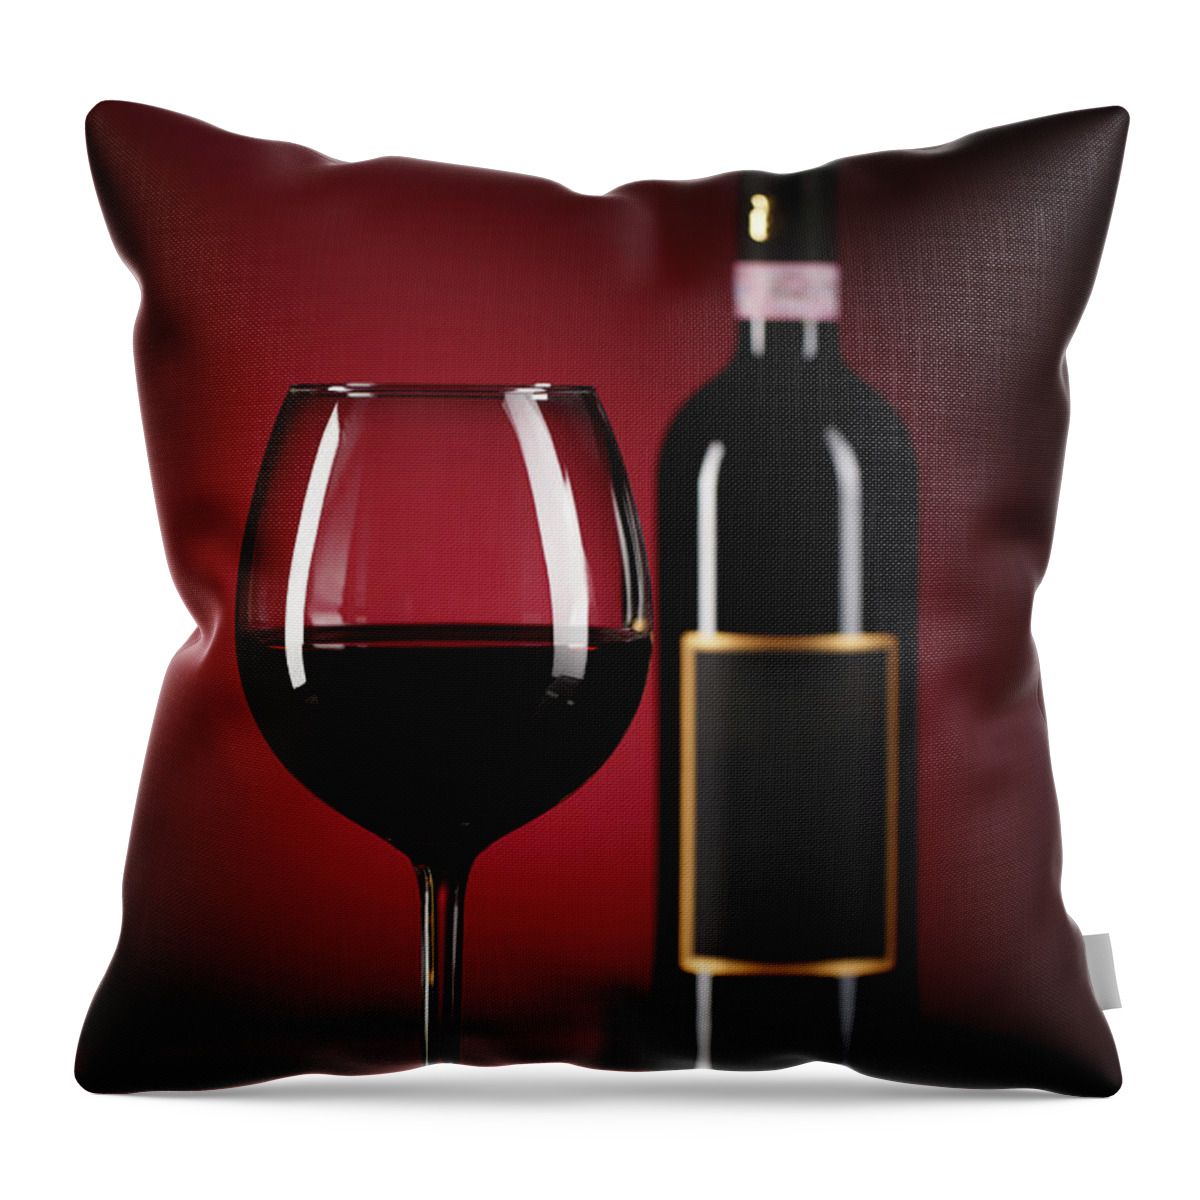 Empty Throw Pillow featuring the photograph Red Wine by Photoevent